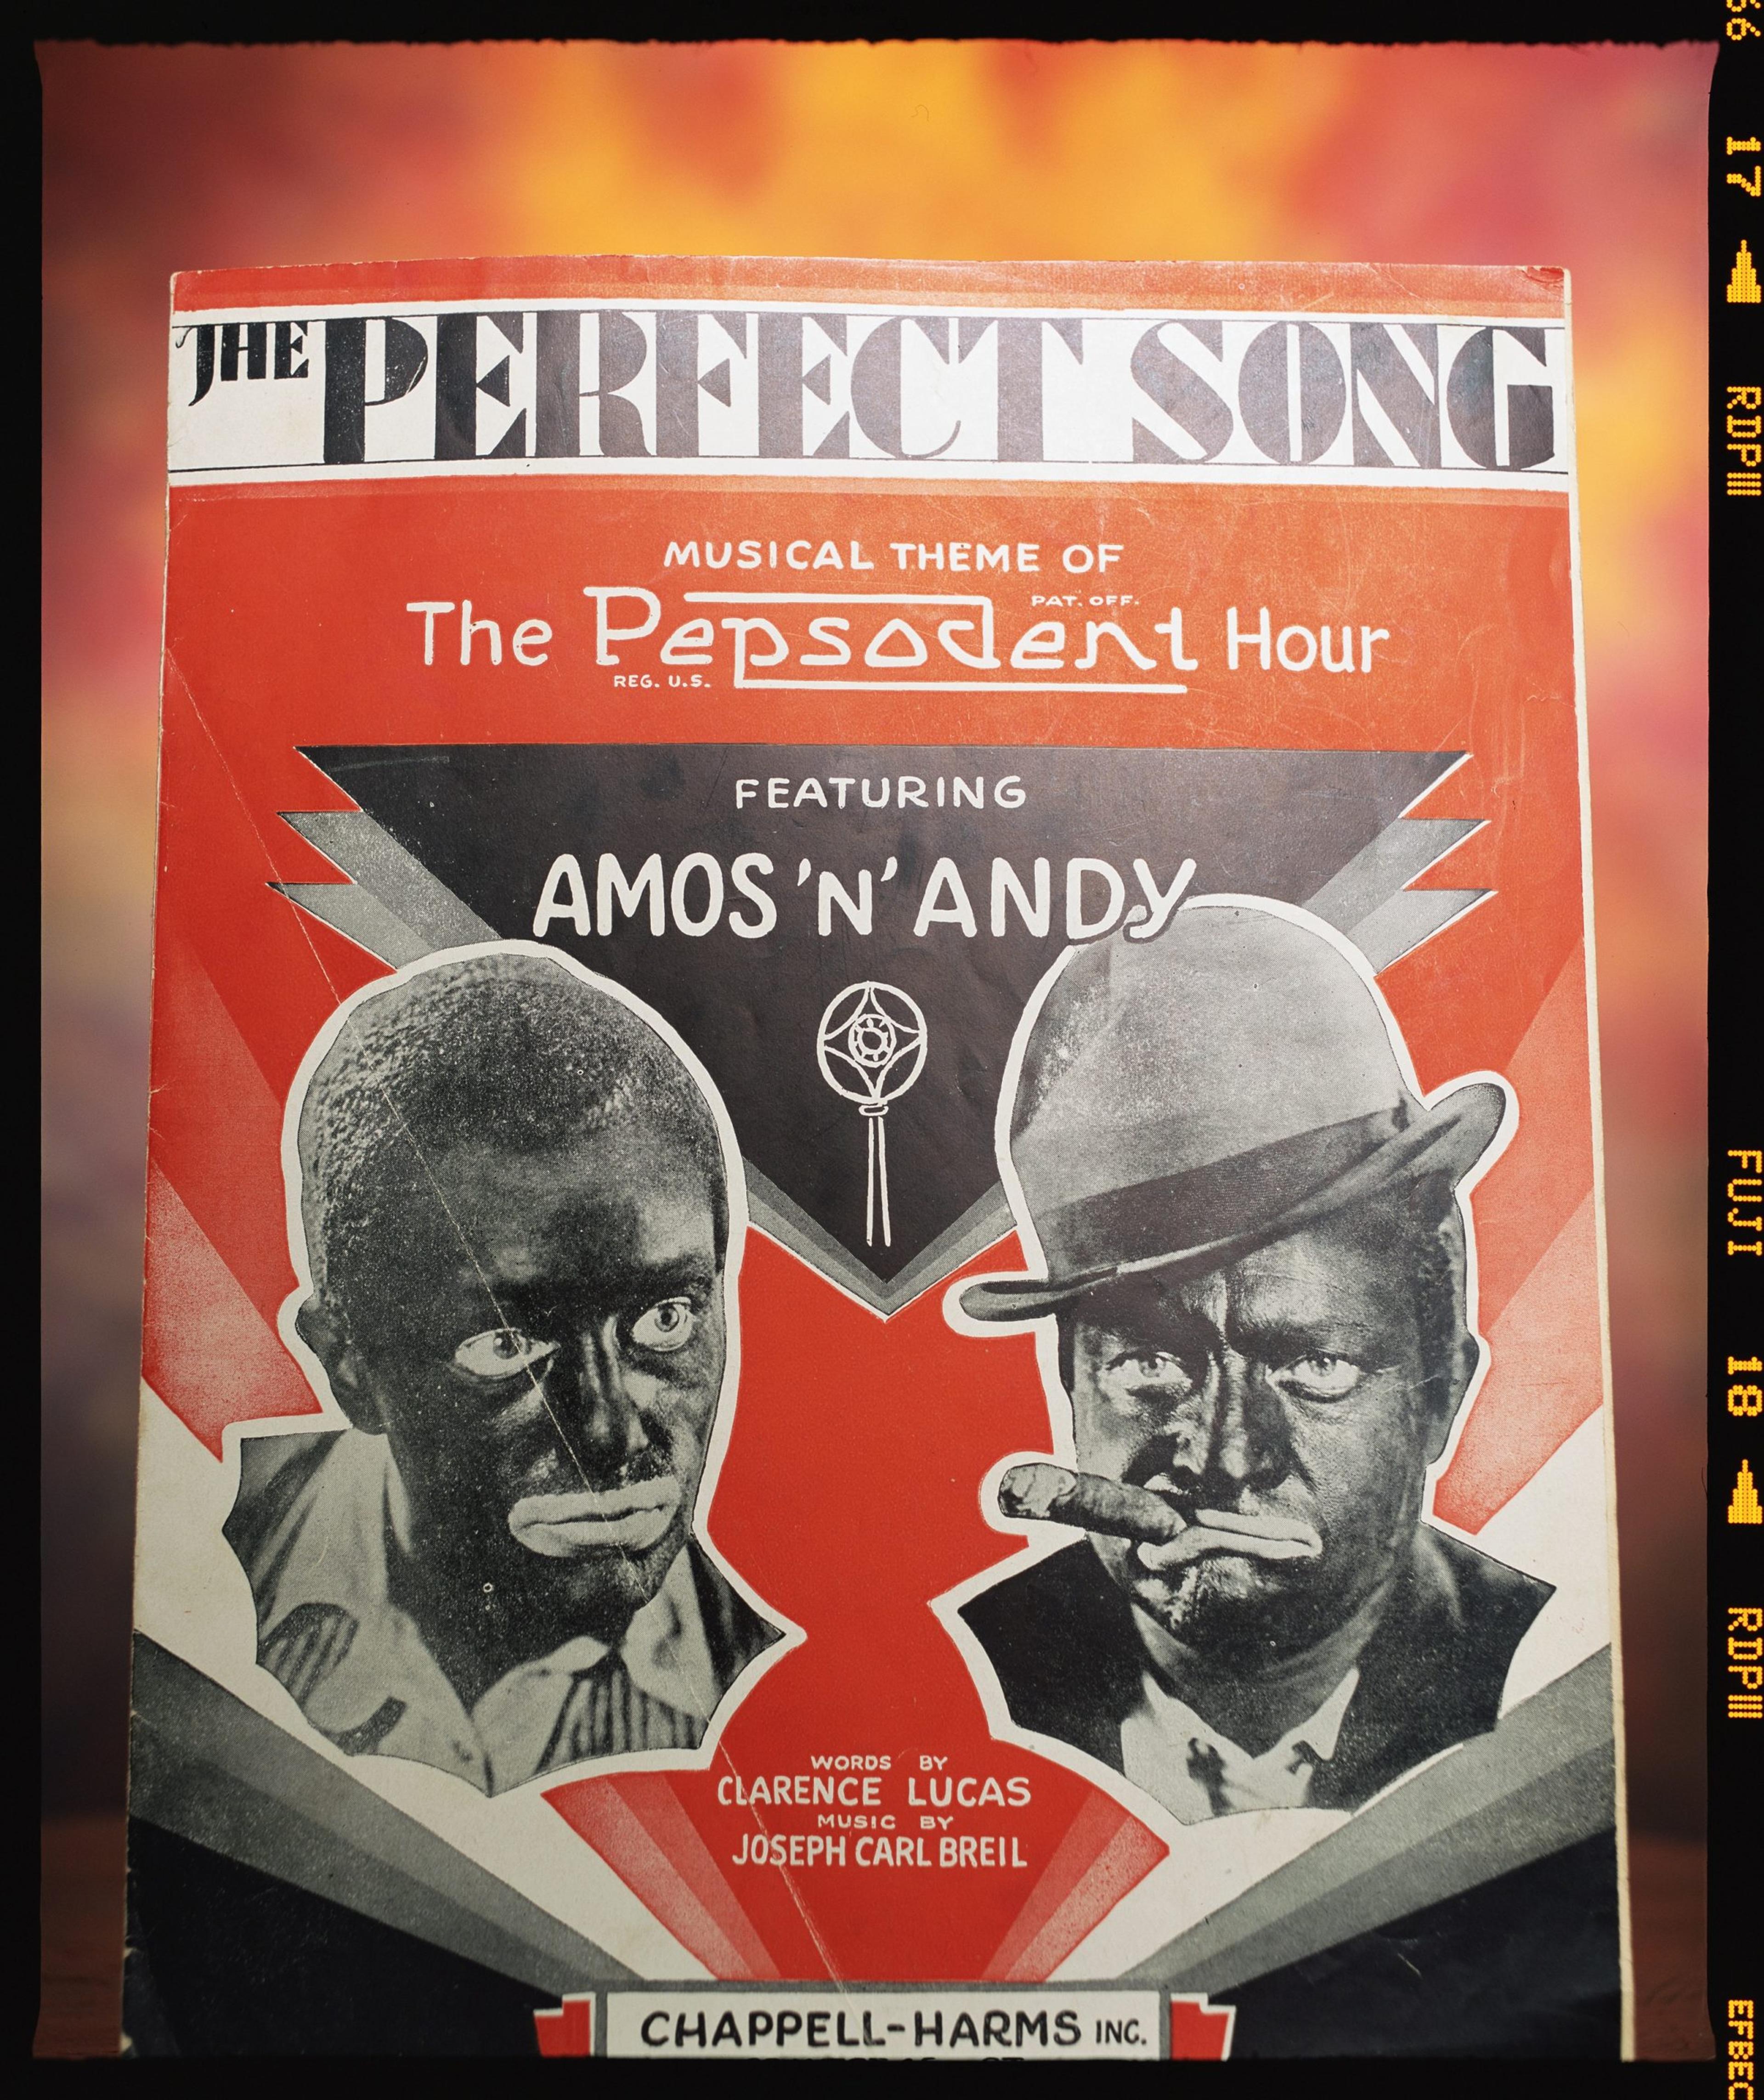 A photo of a 1930's music sheet for "The Perfect Song" Featuring Amos N Andy